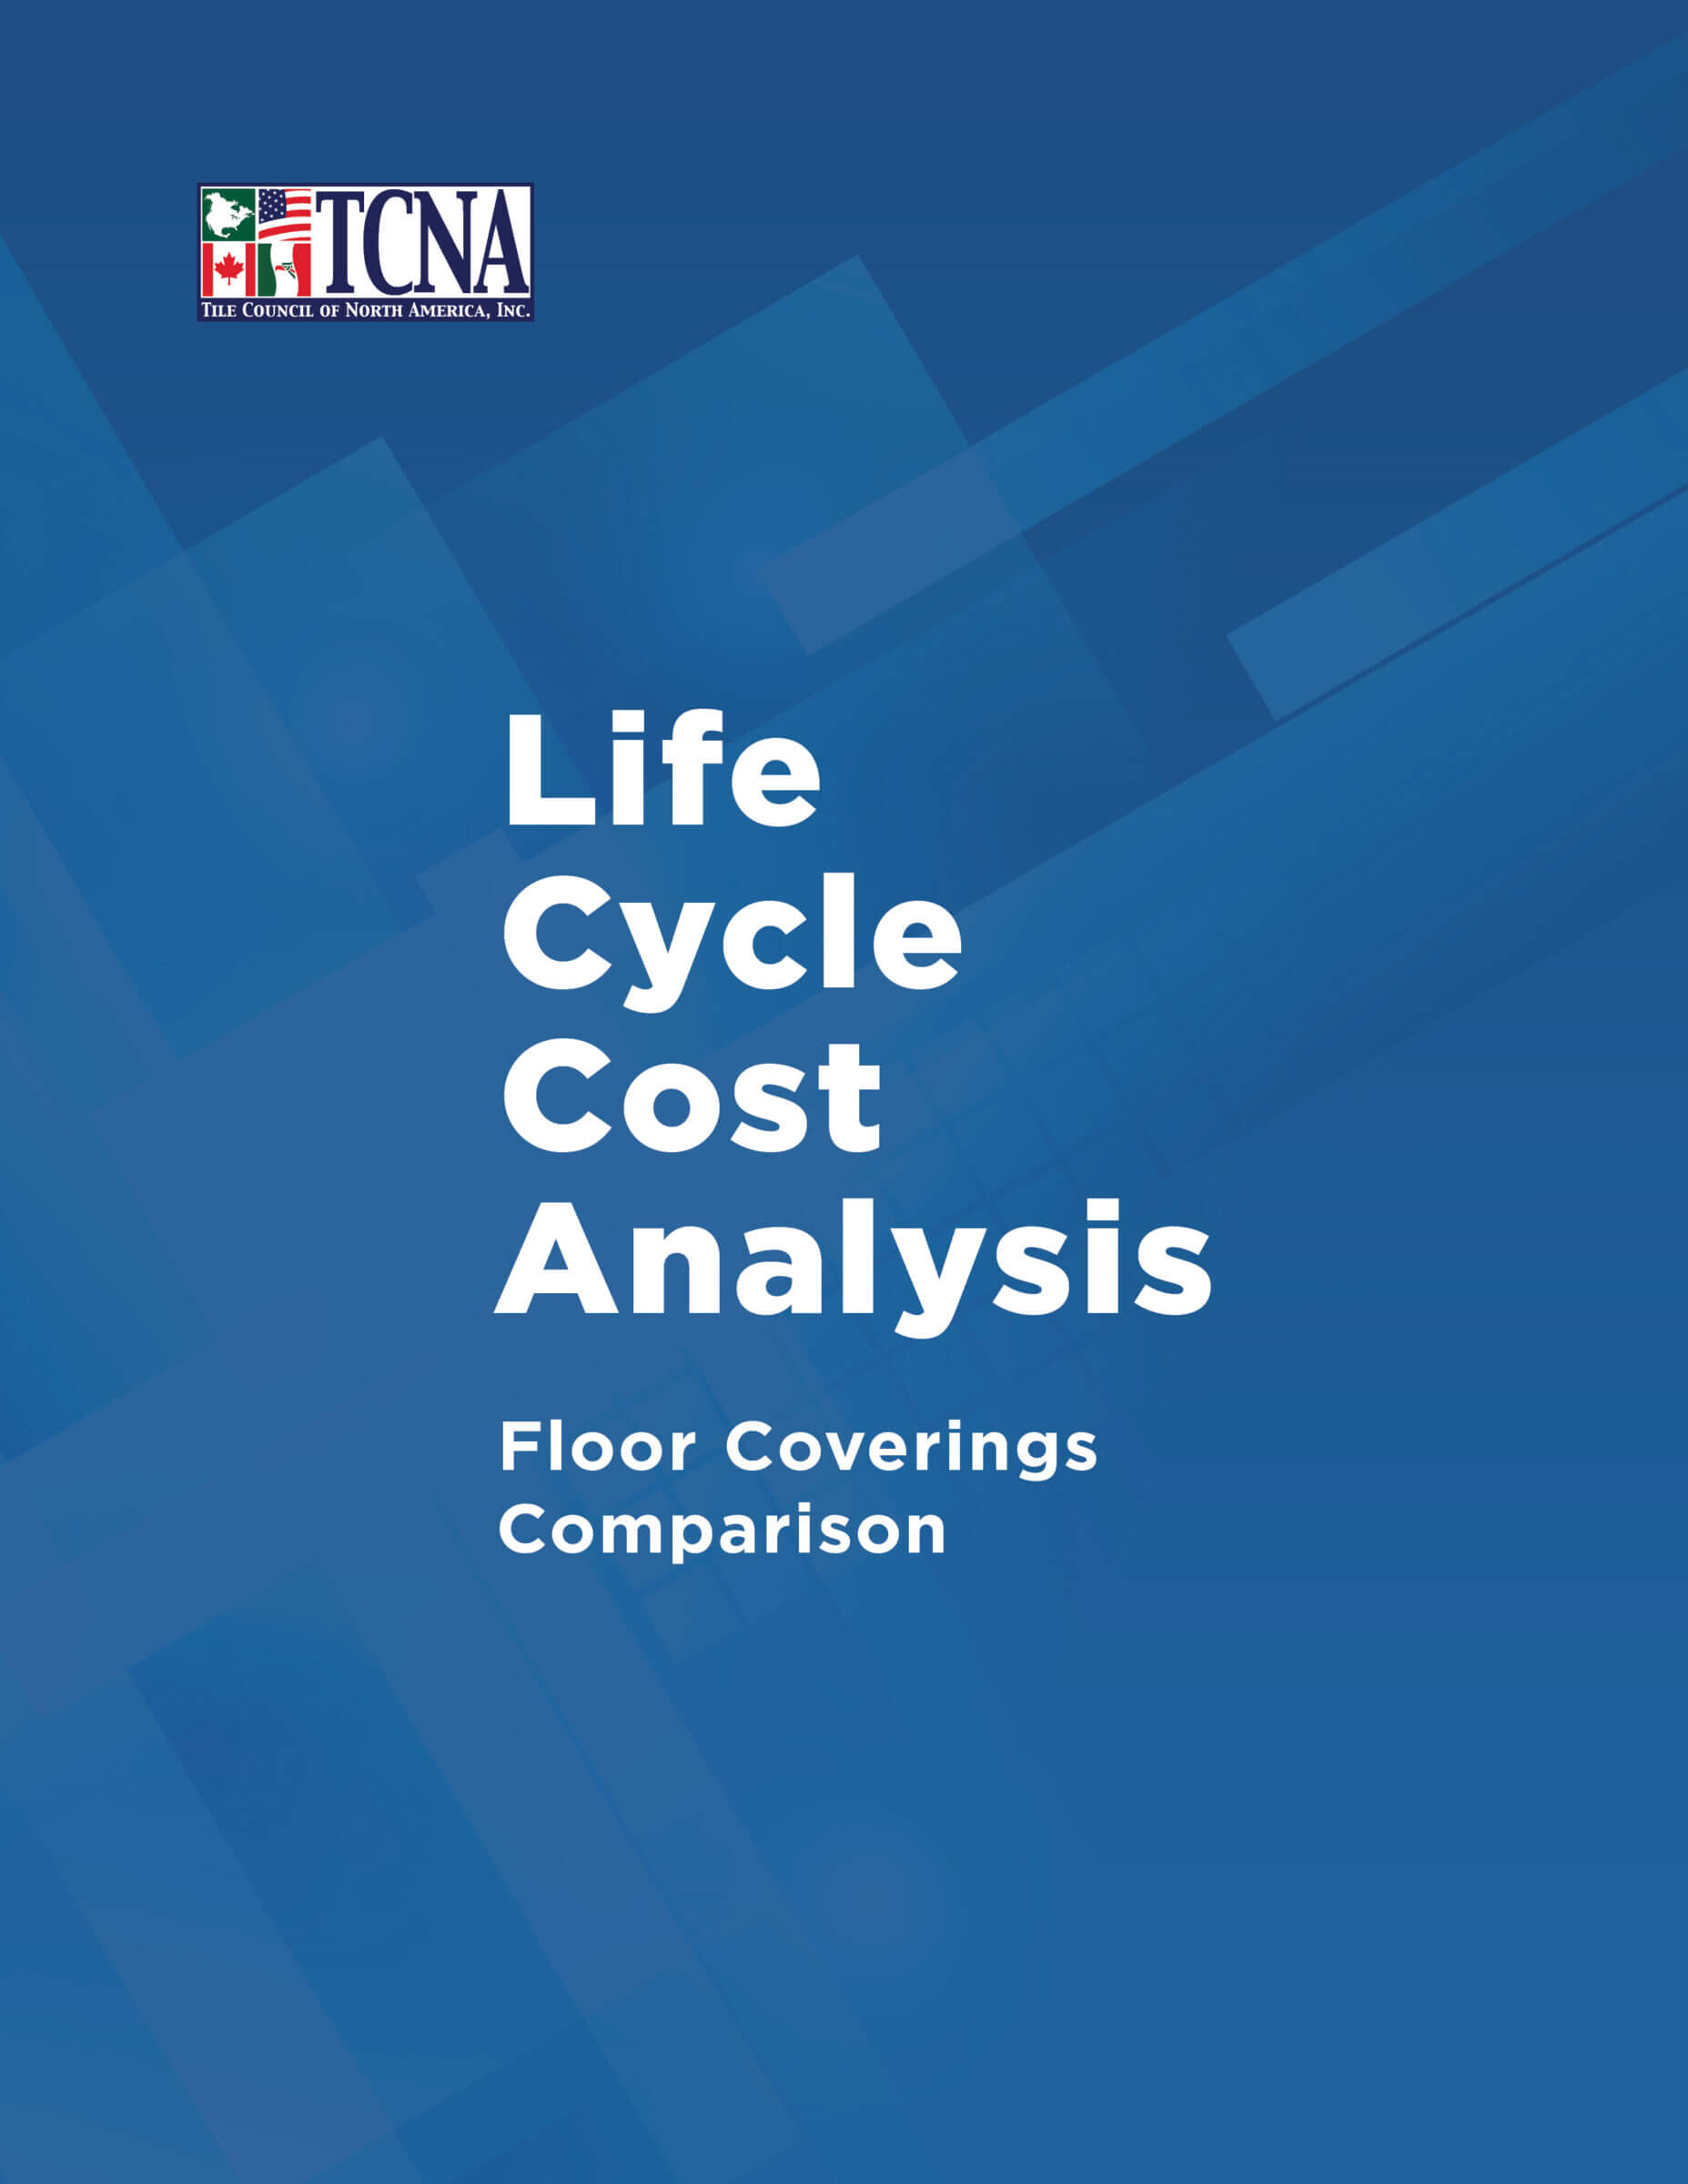 Life Cycle Cost Analysis — Floor Coverings Comparison Report